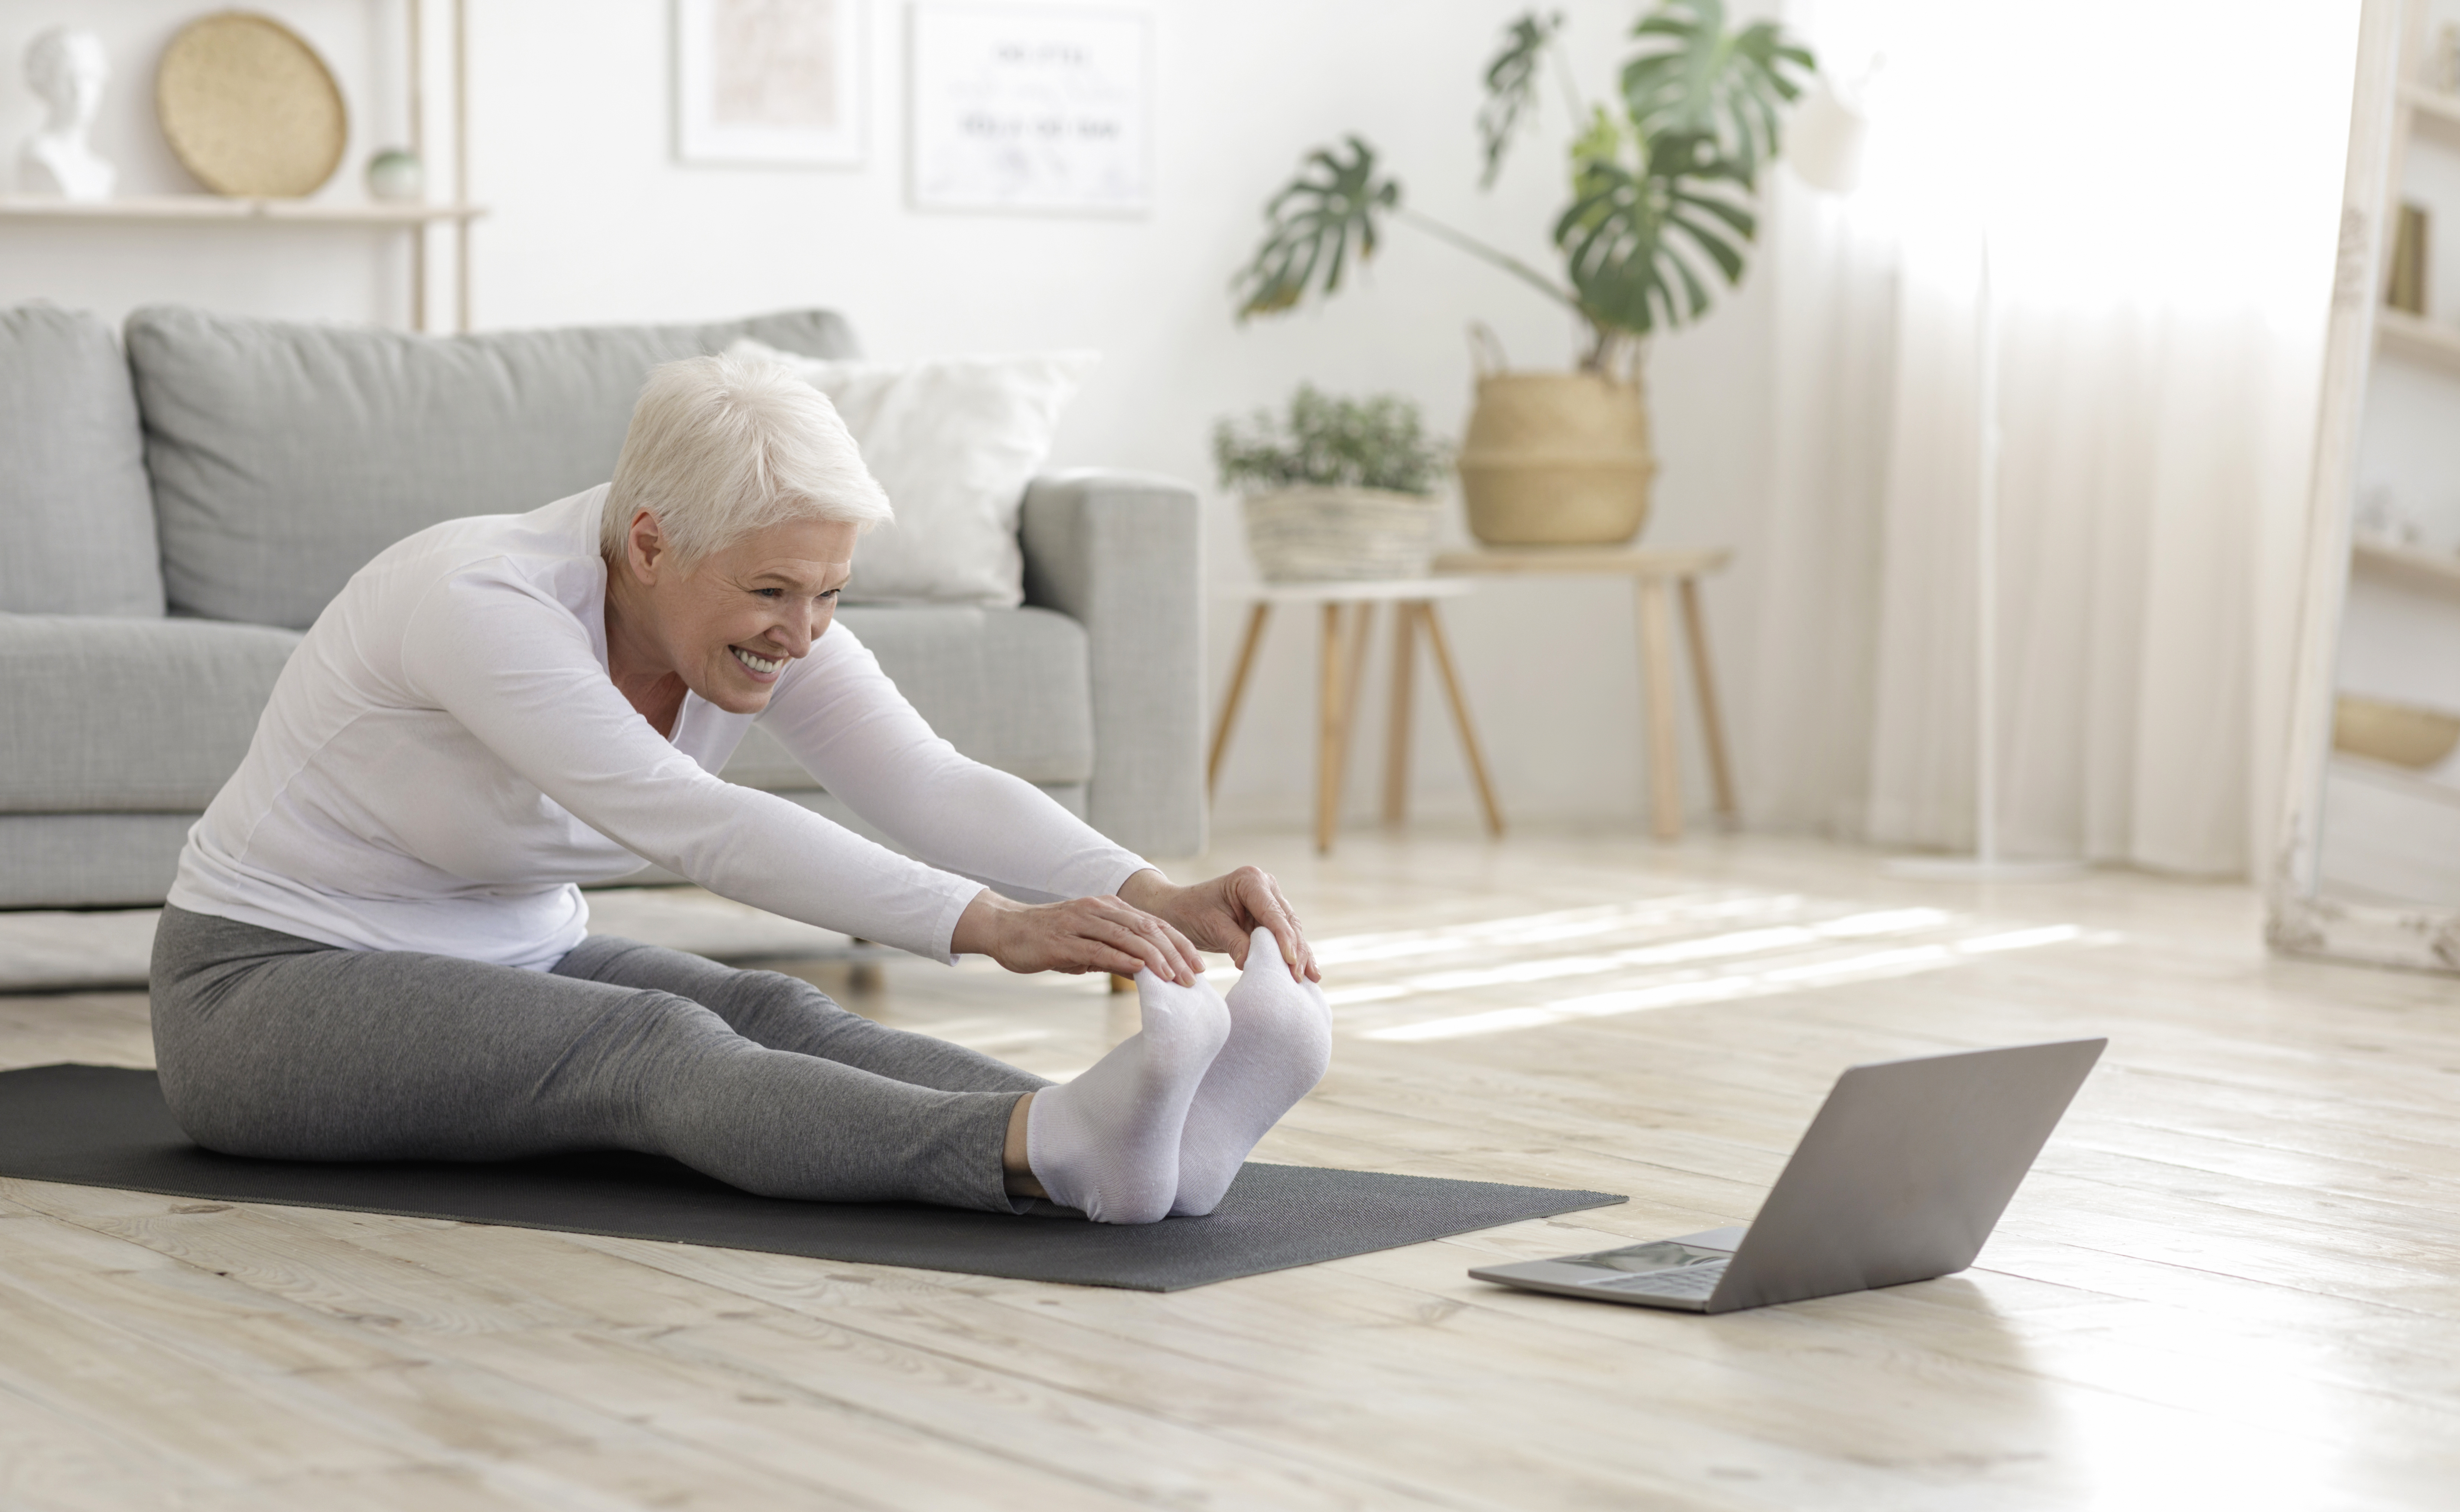 Don’t Stop Moving! Why Physical Activity is Key Part of Healthy Aging